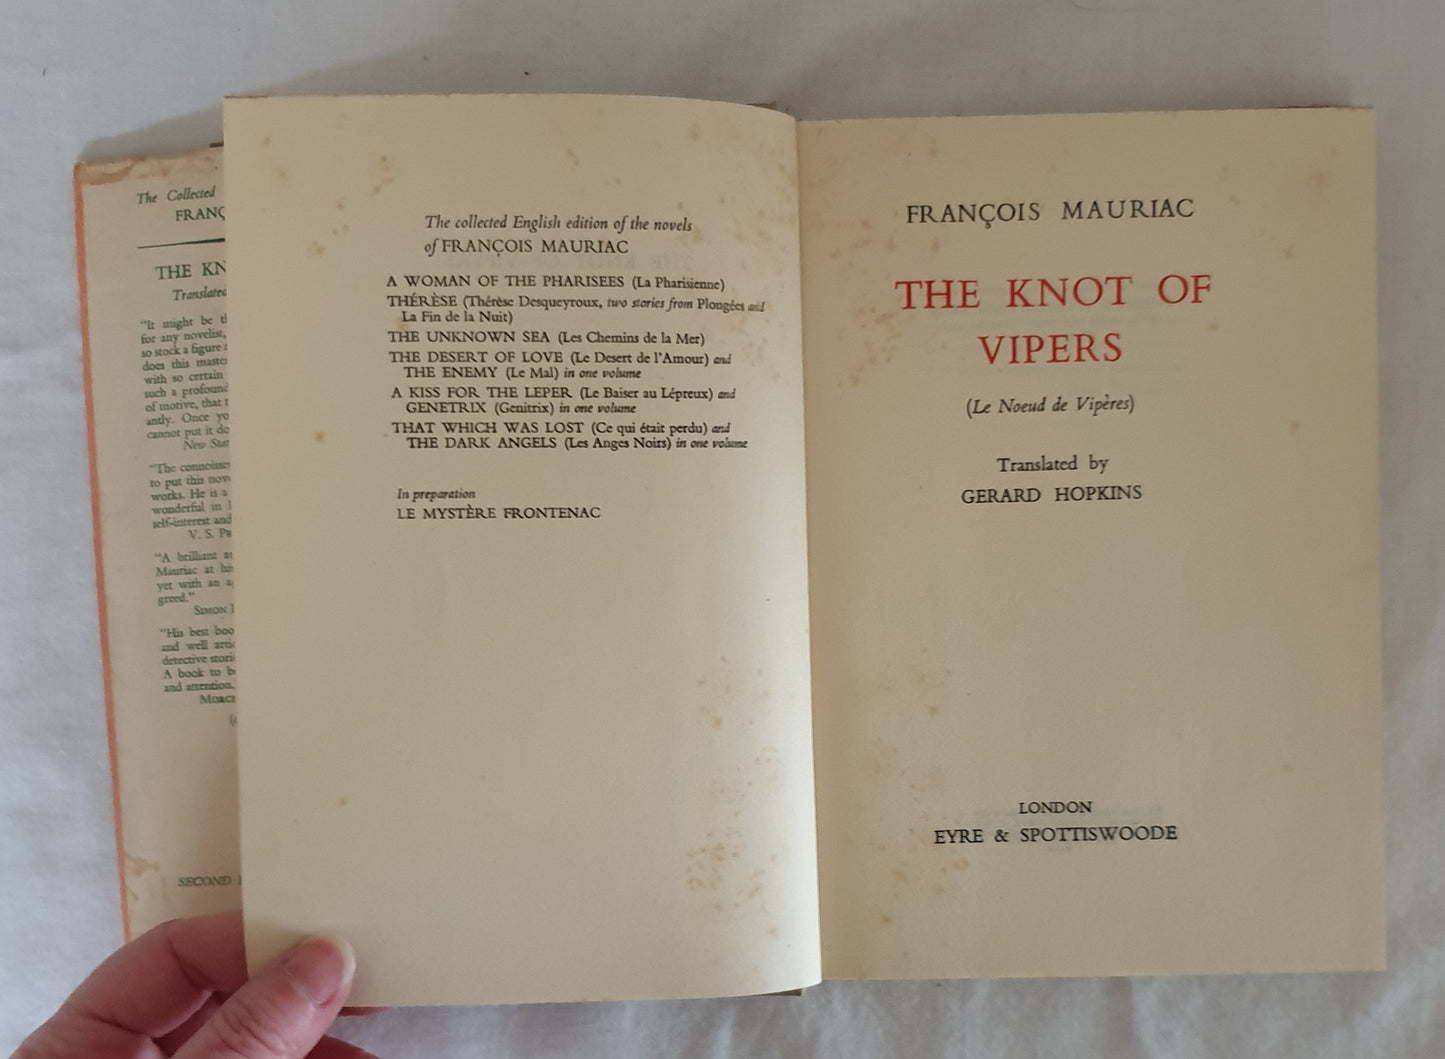 The Knot of Vipers by Francois Mauriac